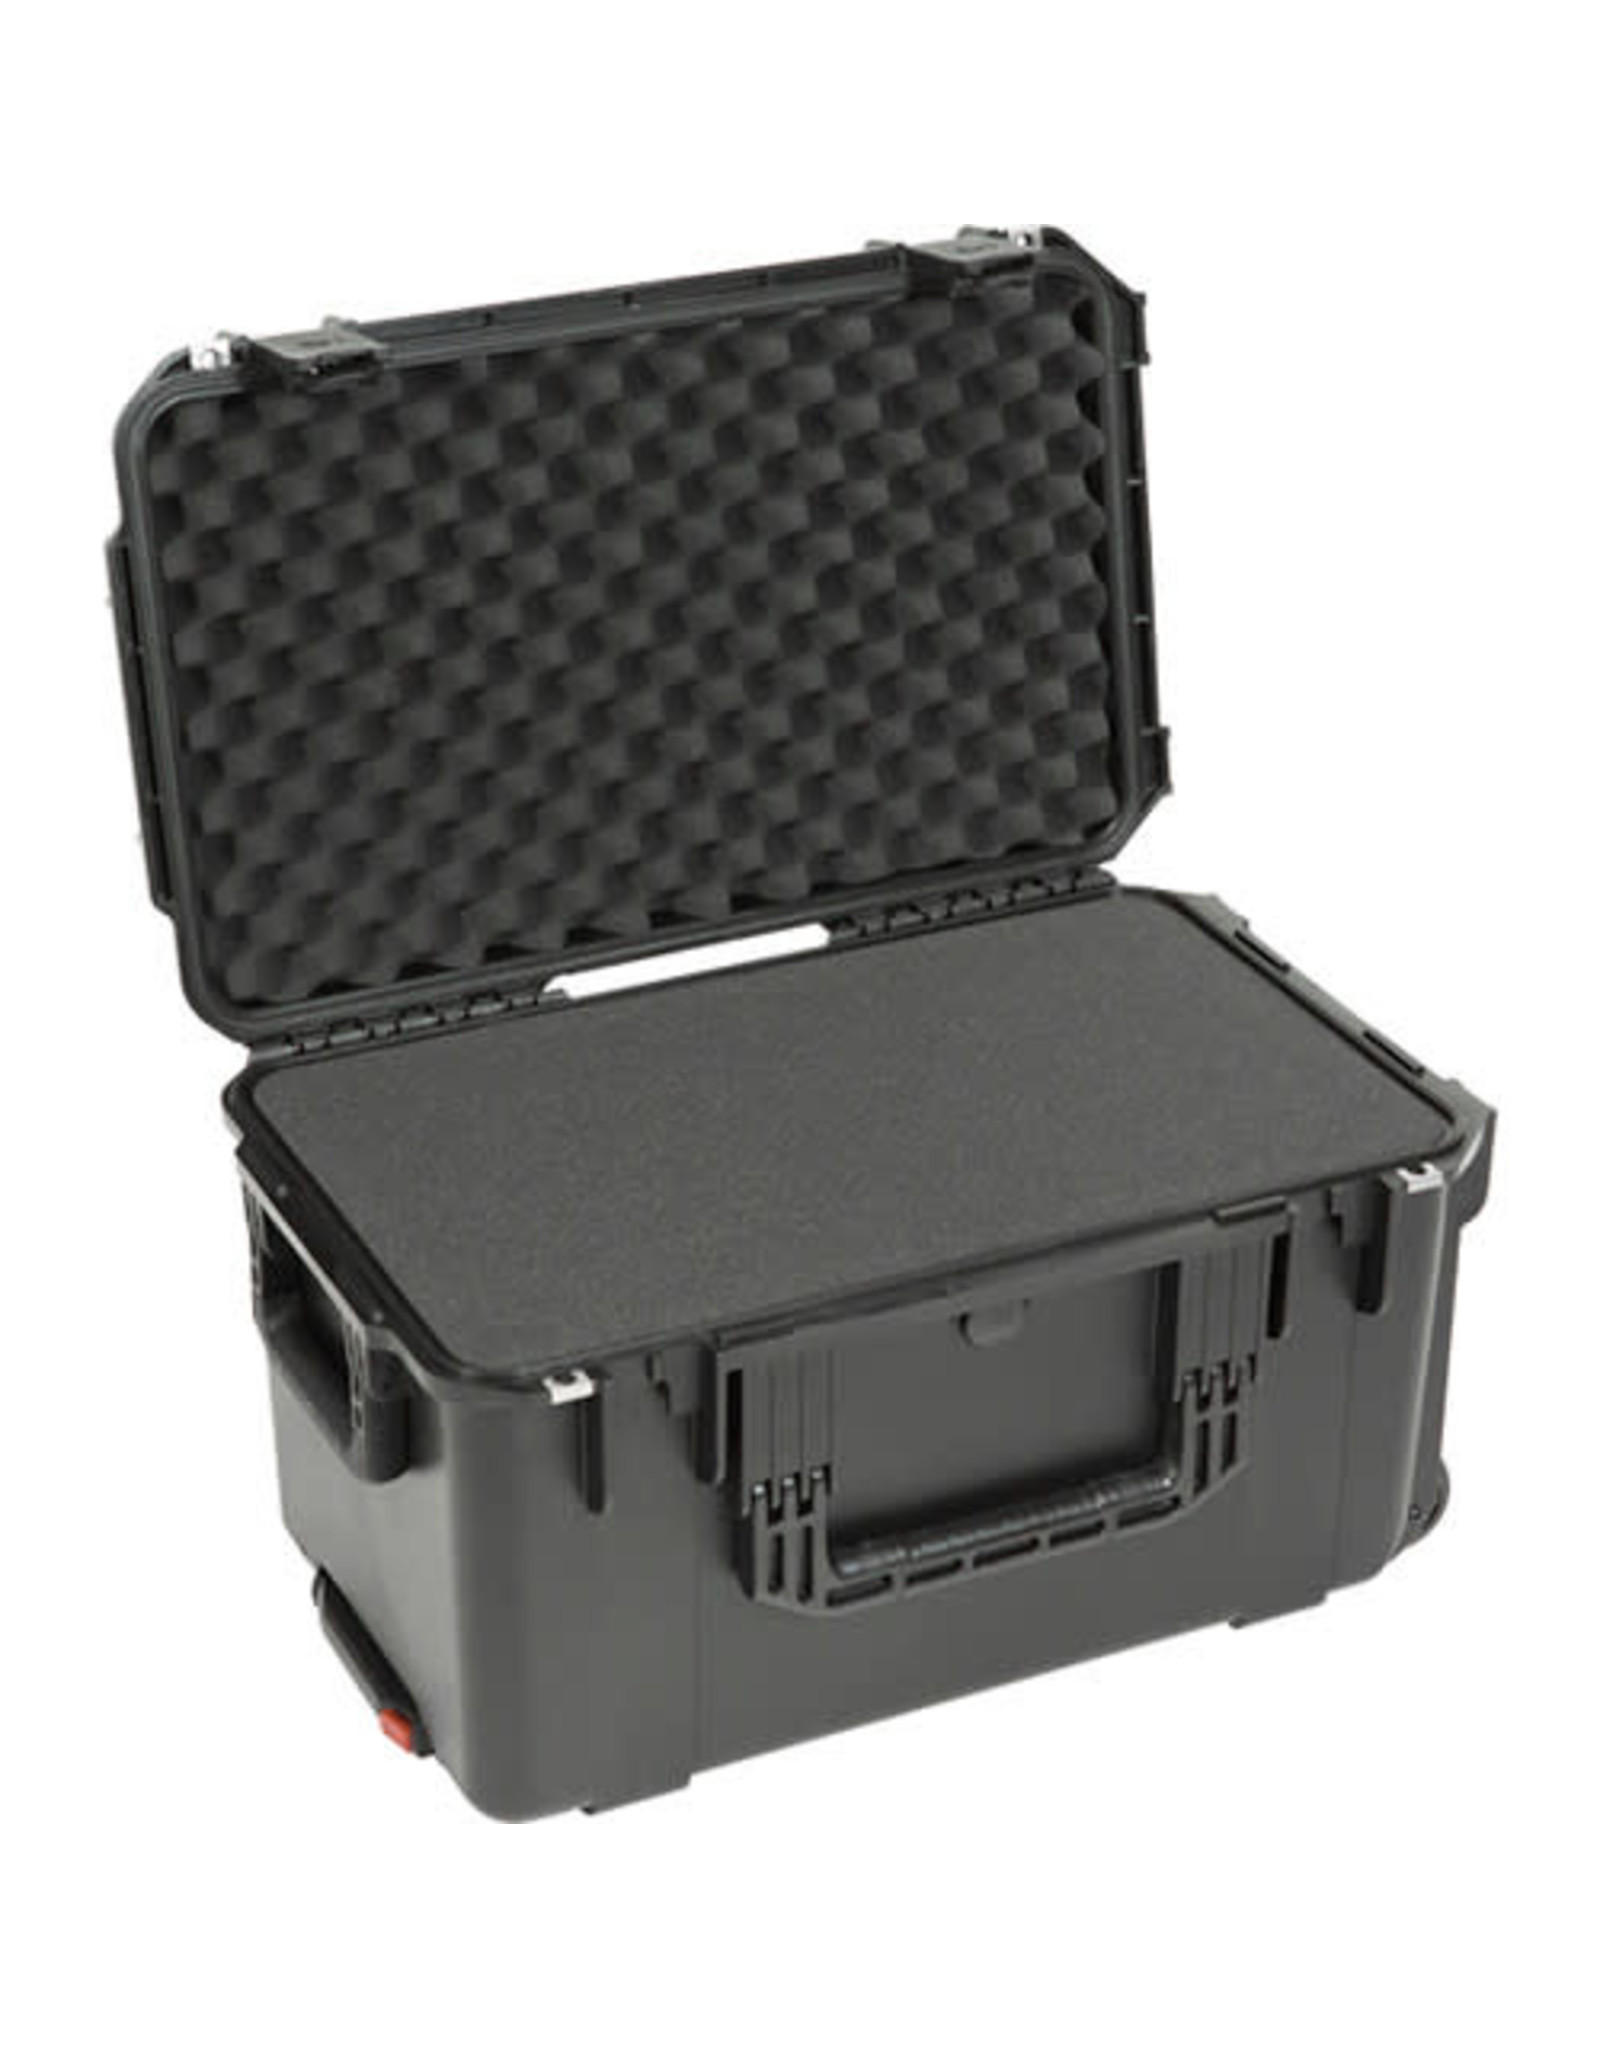 SKB Cases SKB 3i-Series 2213-12 Waterproof with Cubed Foam Utility Case with Wheels-3i-2213-12BC